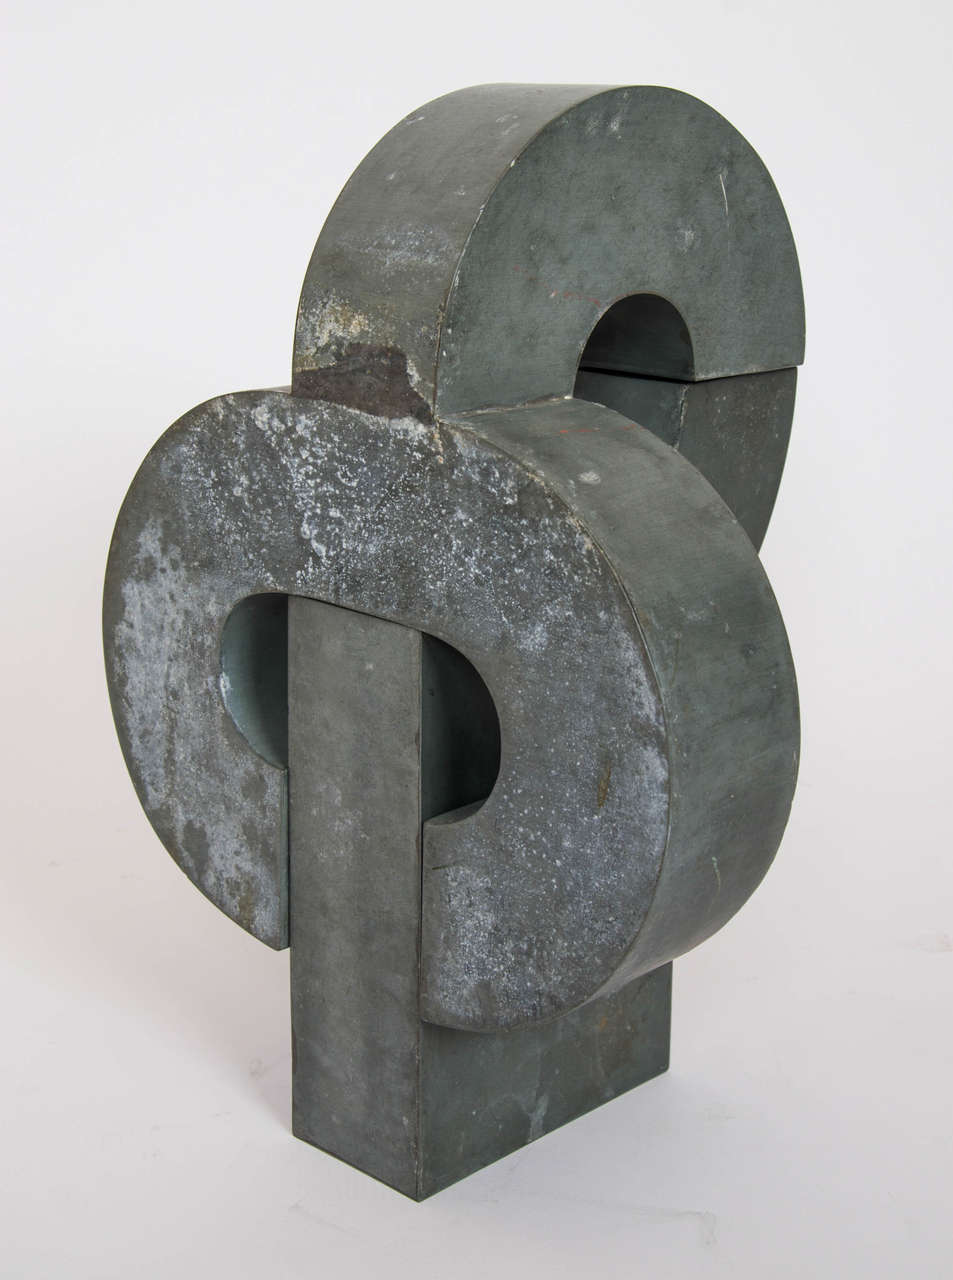 Minimalist Abstract Sculpture in Two Parts